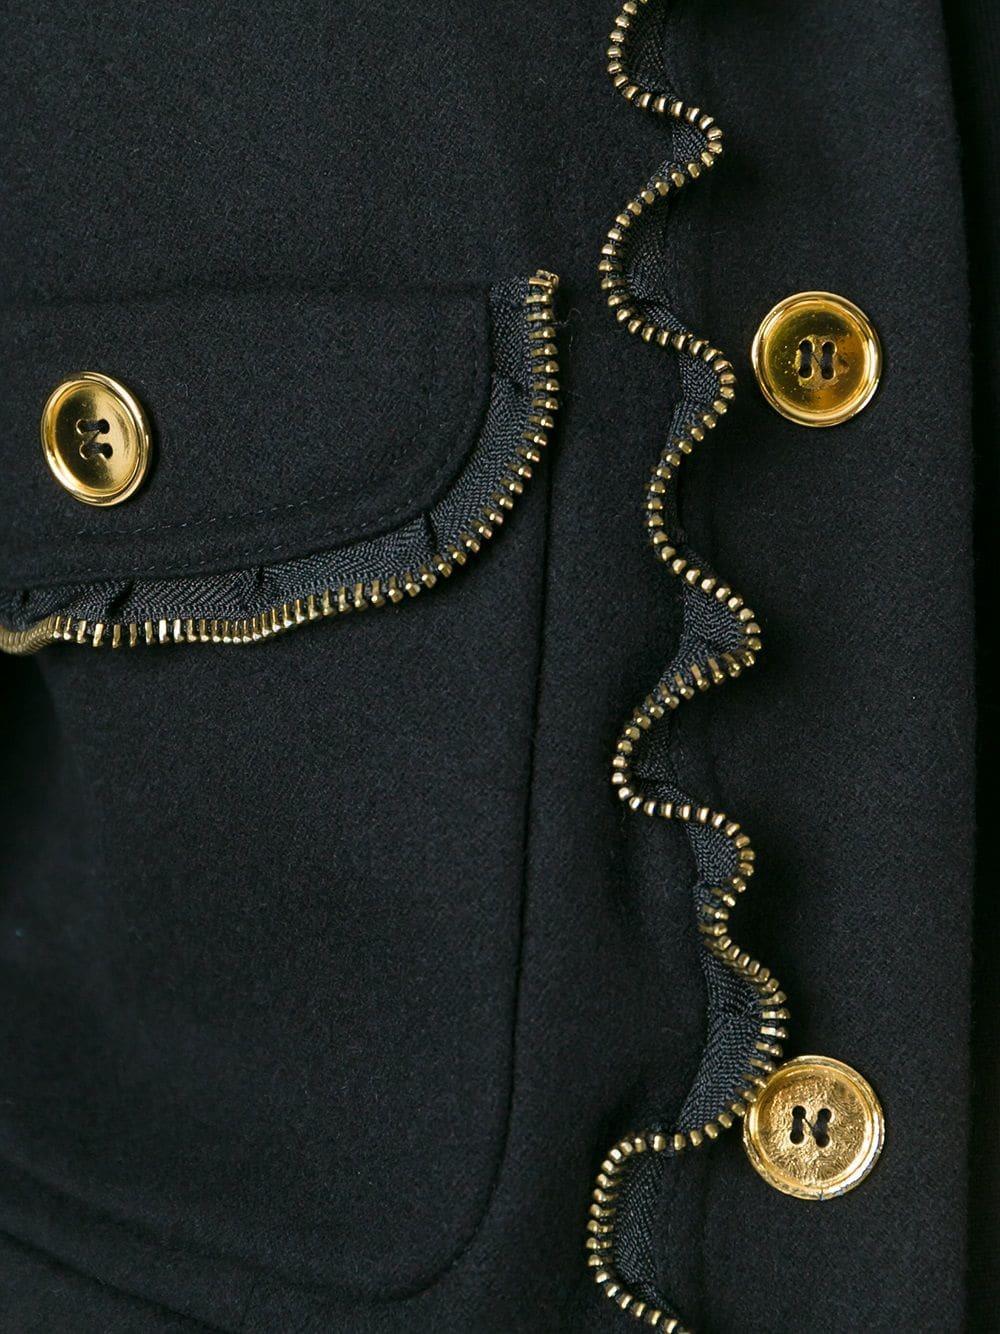 Cool Moschino wool and cashmere black jacket featured a gold-tone decorative buttons and a zip trim detail.

Size: 44 IT

Height: 52 cm
Bust: 49 cm
Shoulder: 42 cm
Sleeve: 60 cm